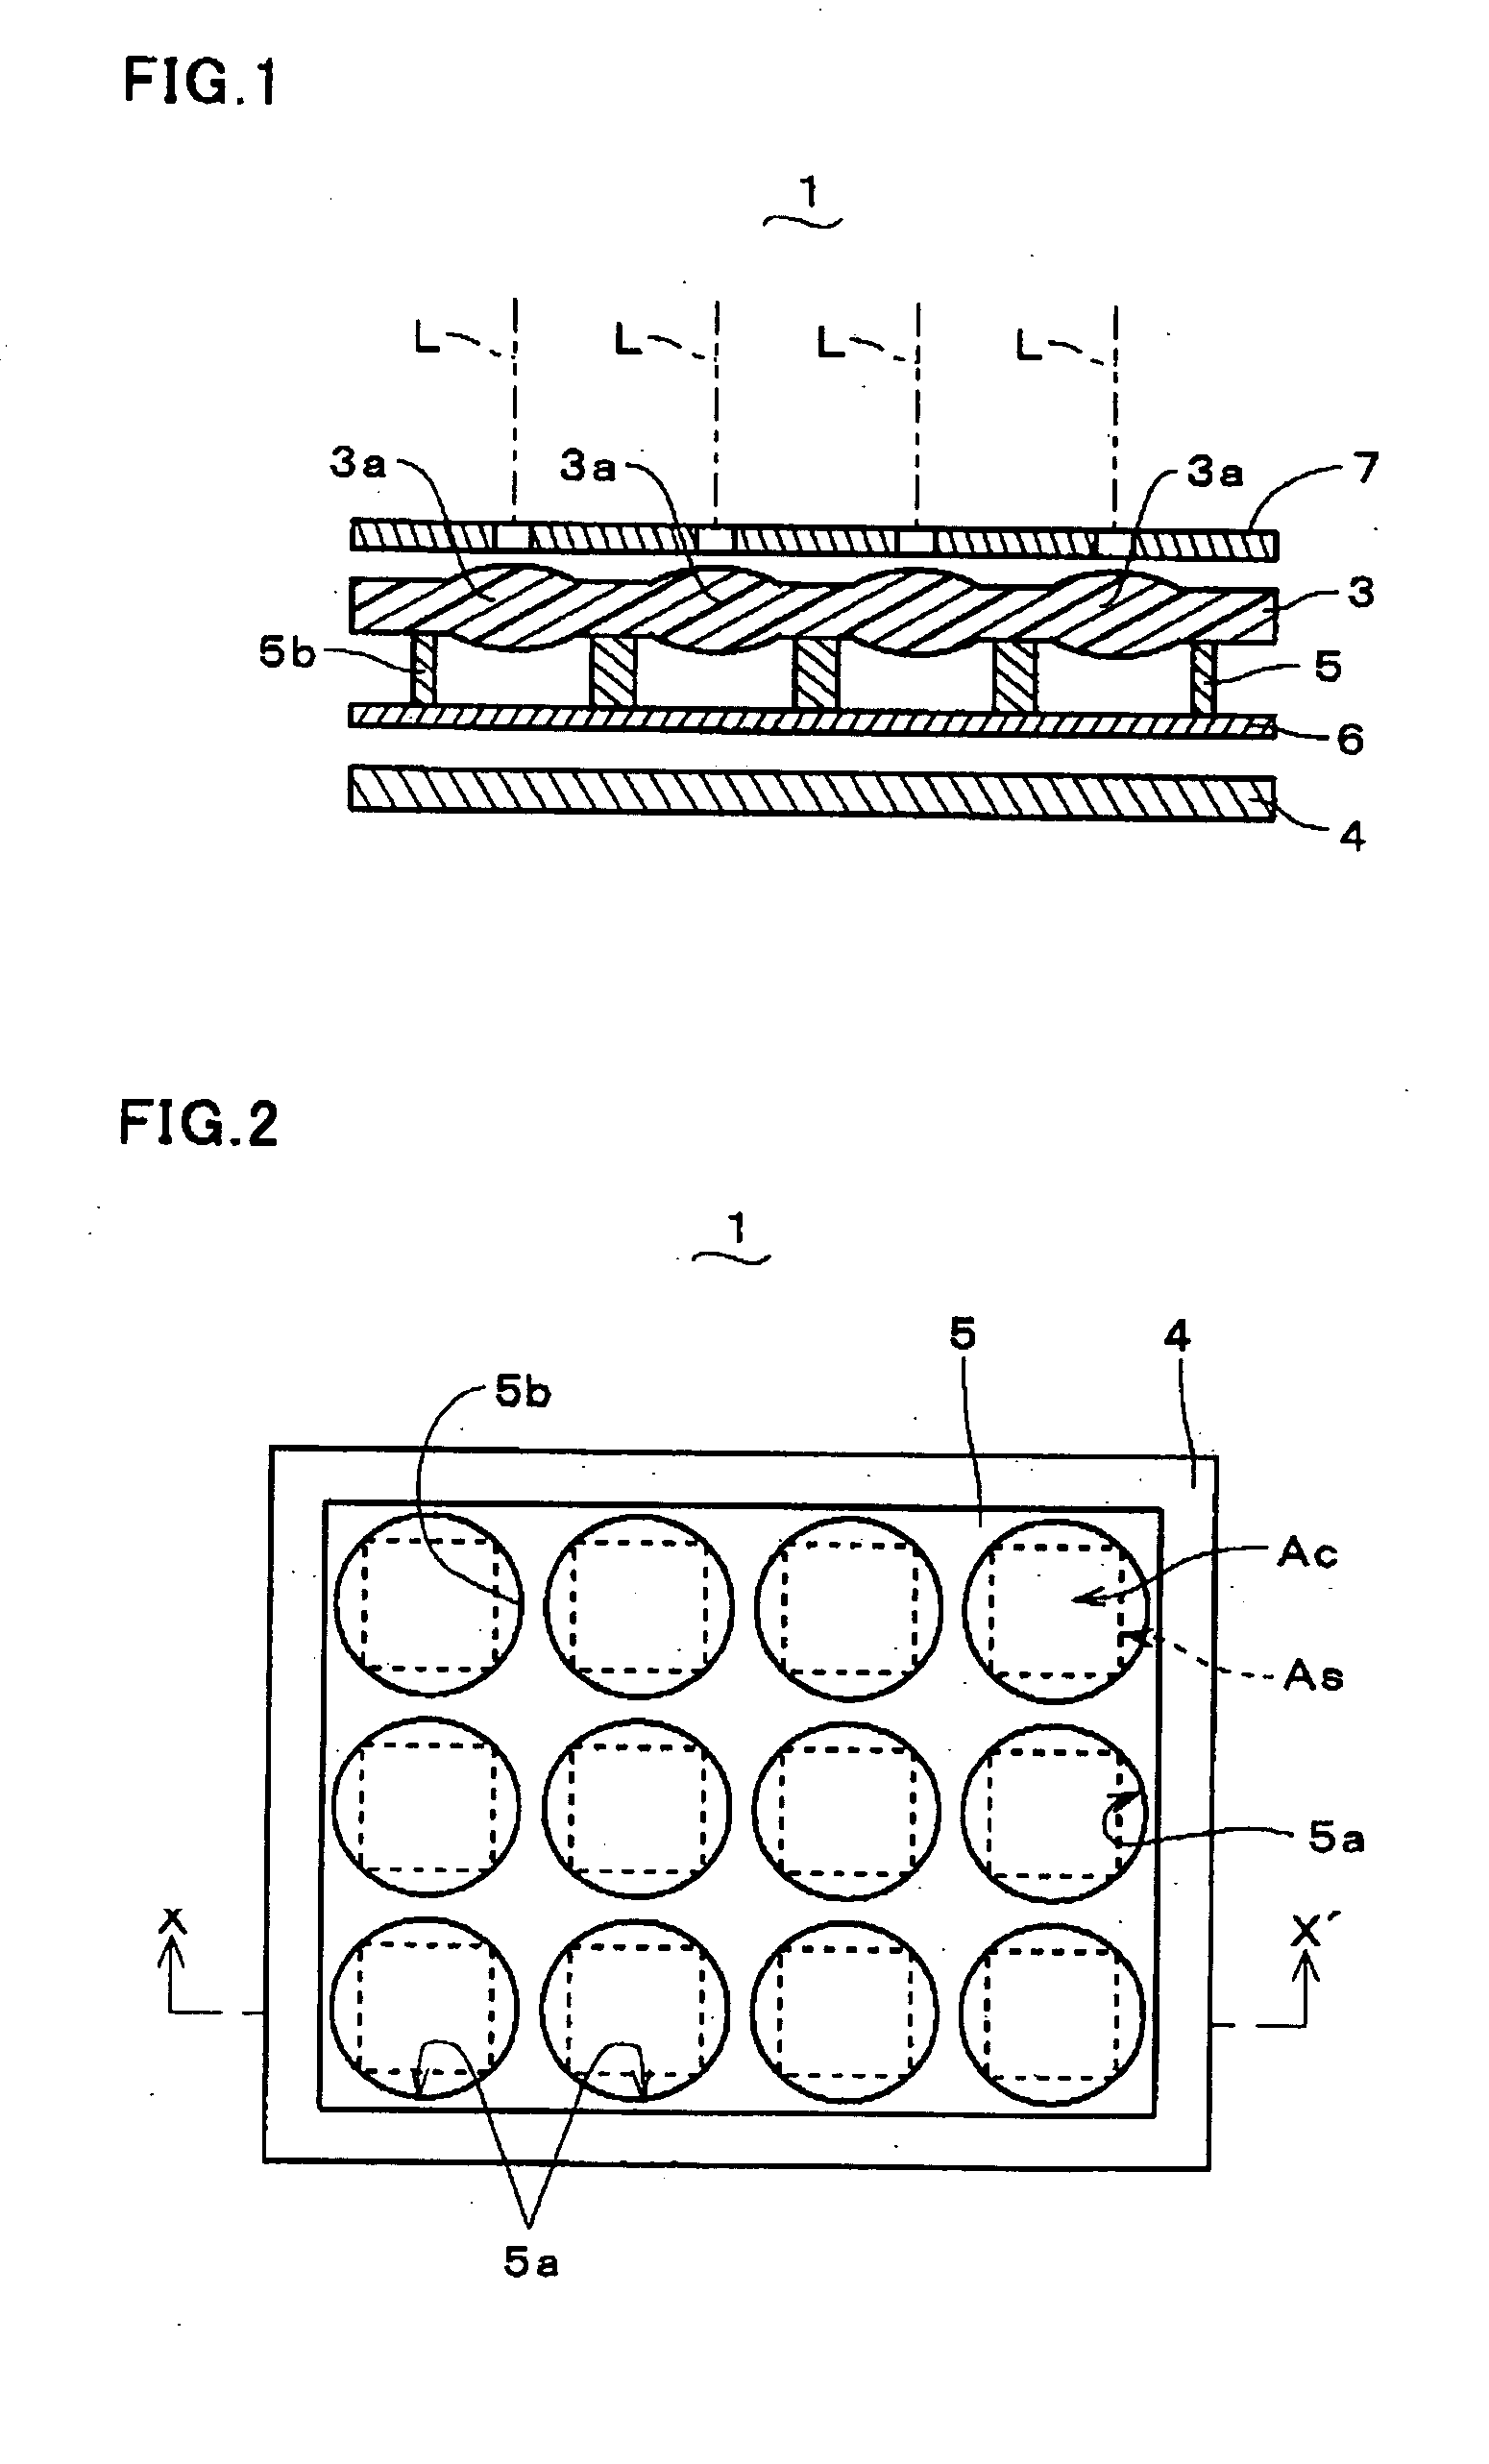 Compound-eye imaging device